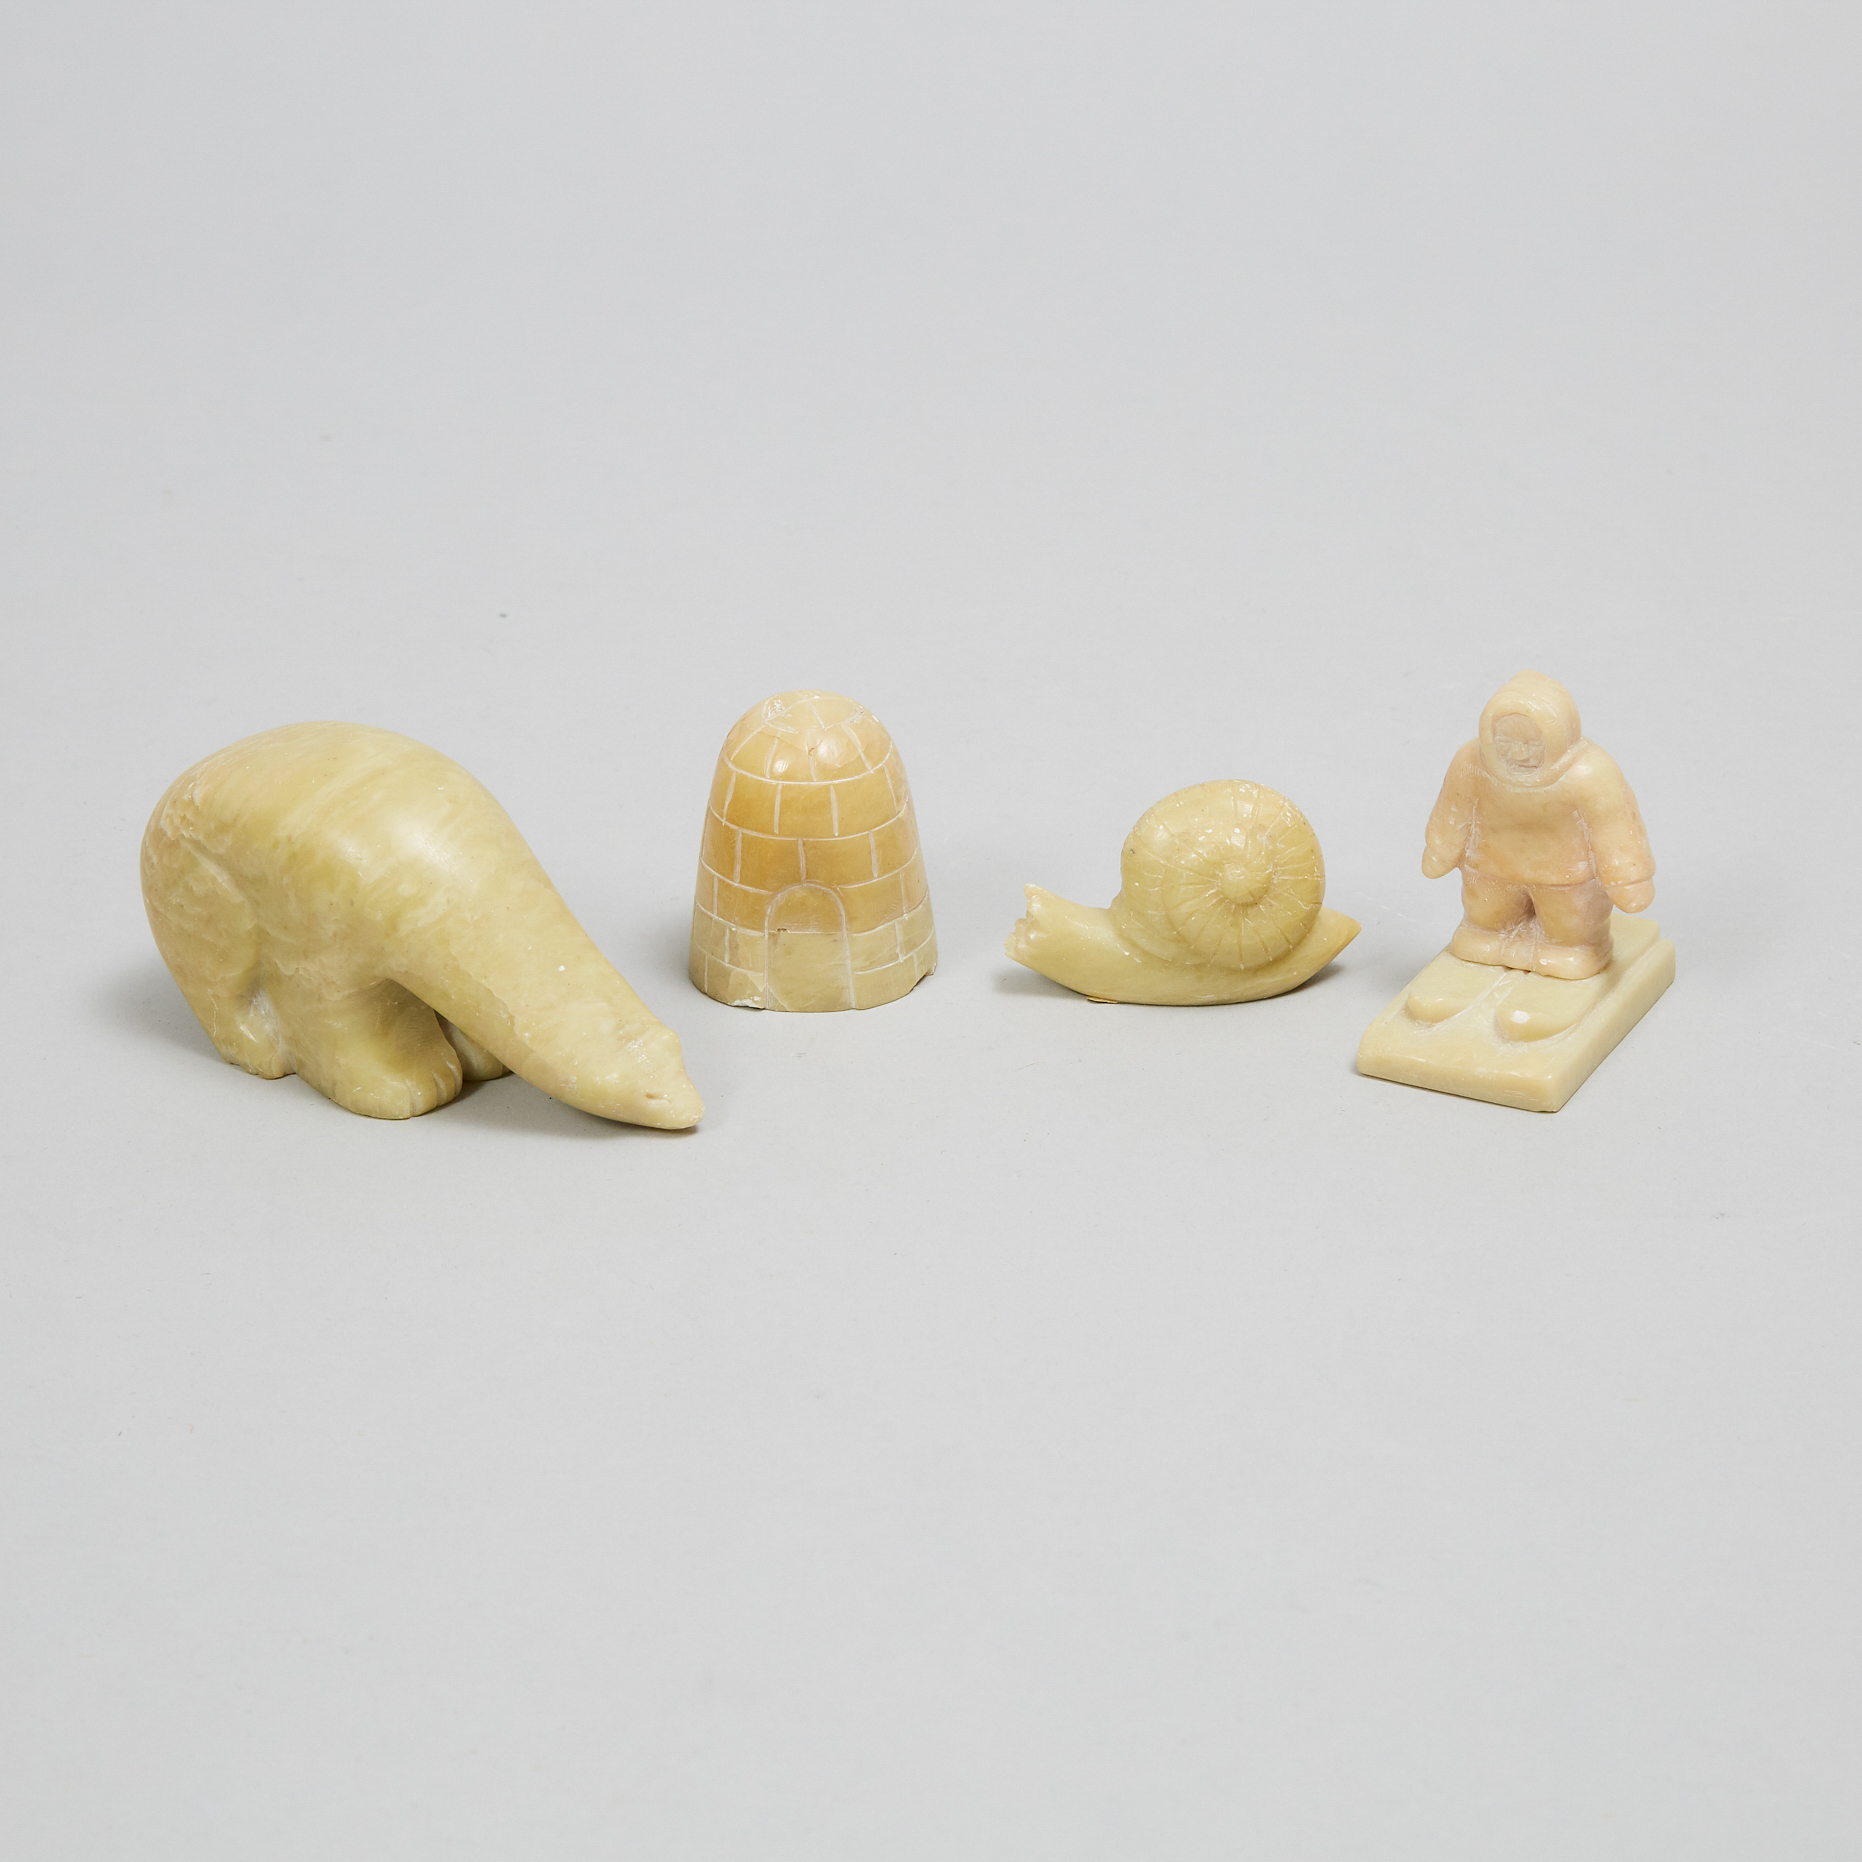 Four Small Grenfell Labrador Industries Carved Serpentine Figures, mid 20th century